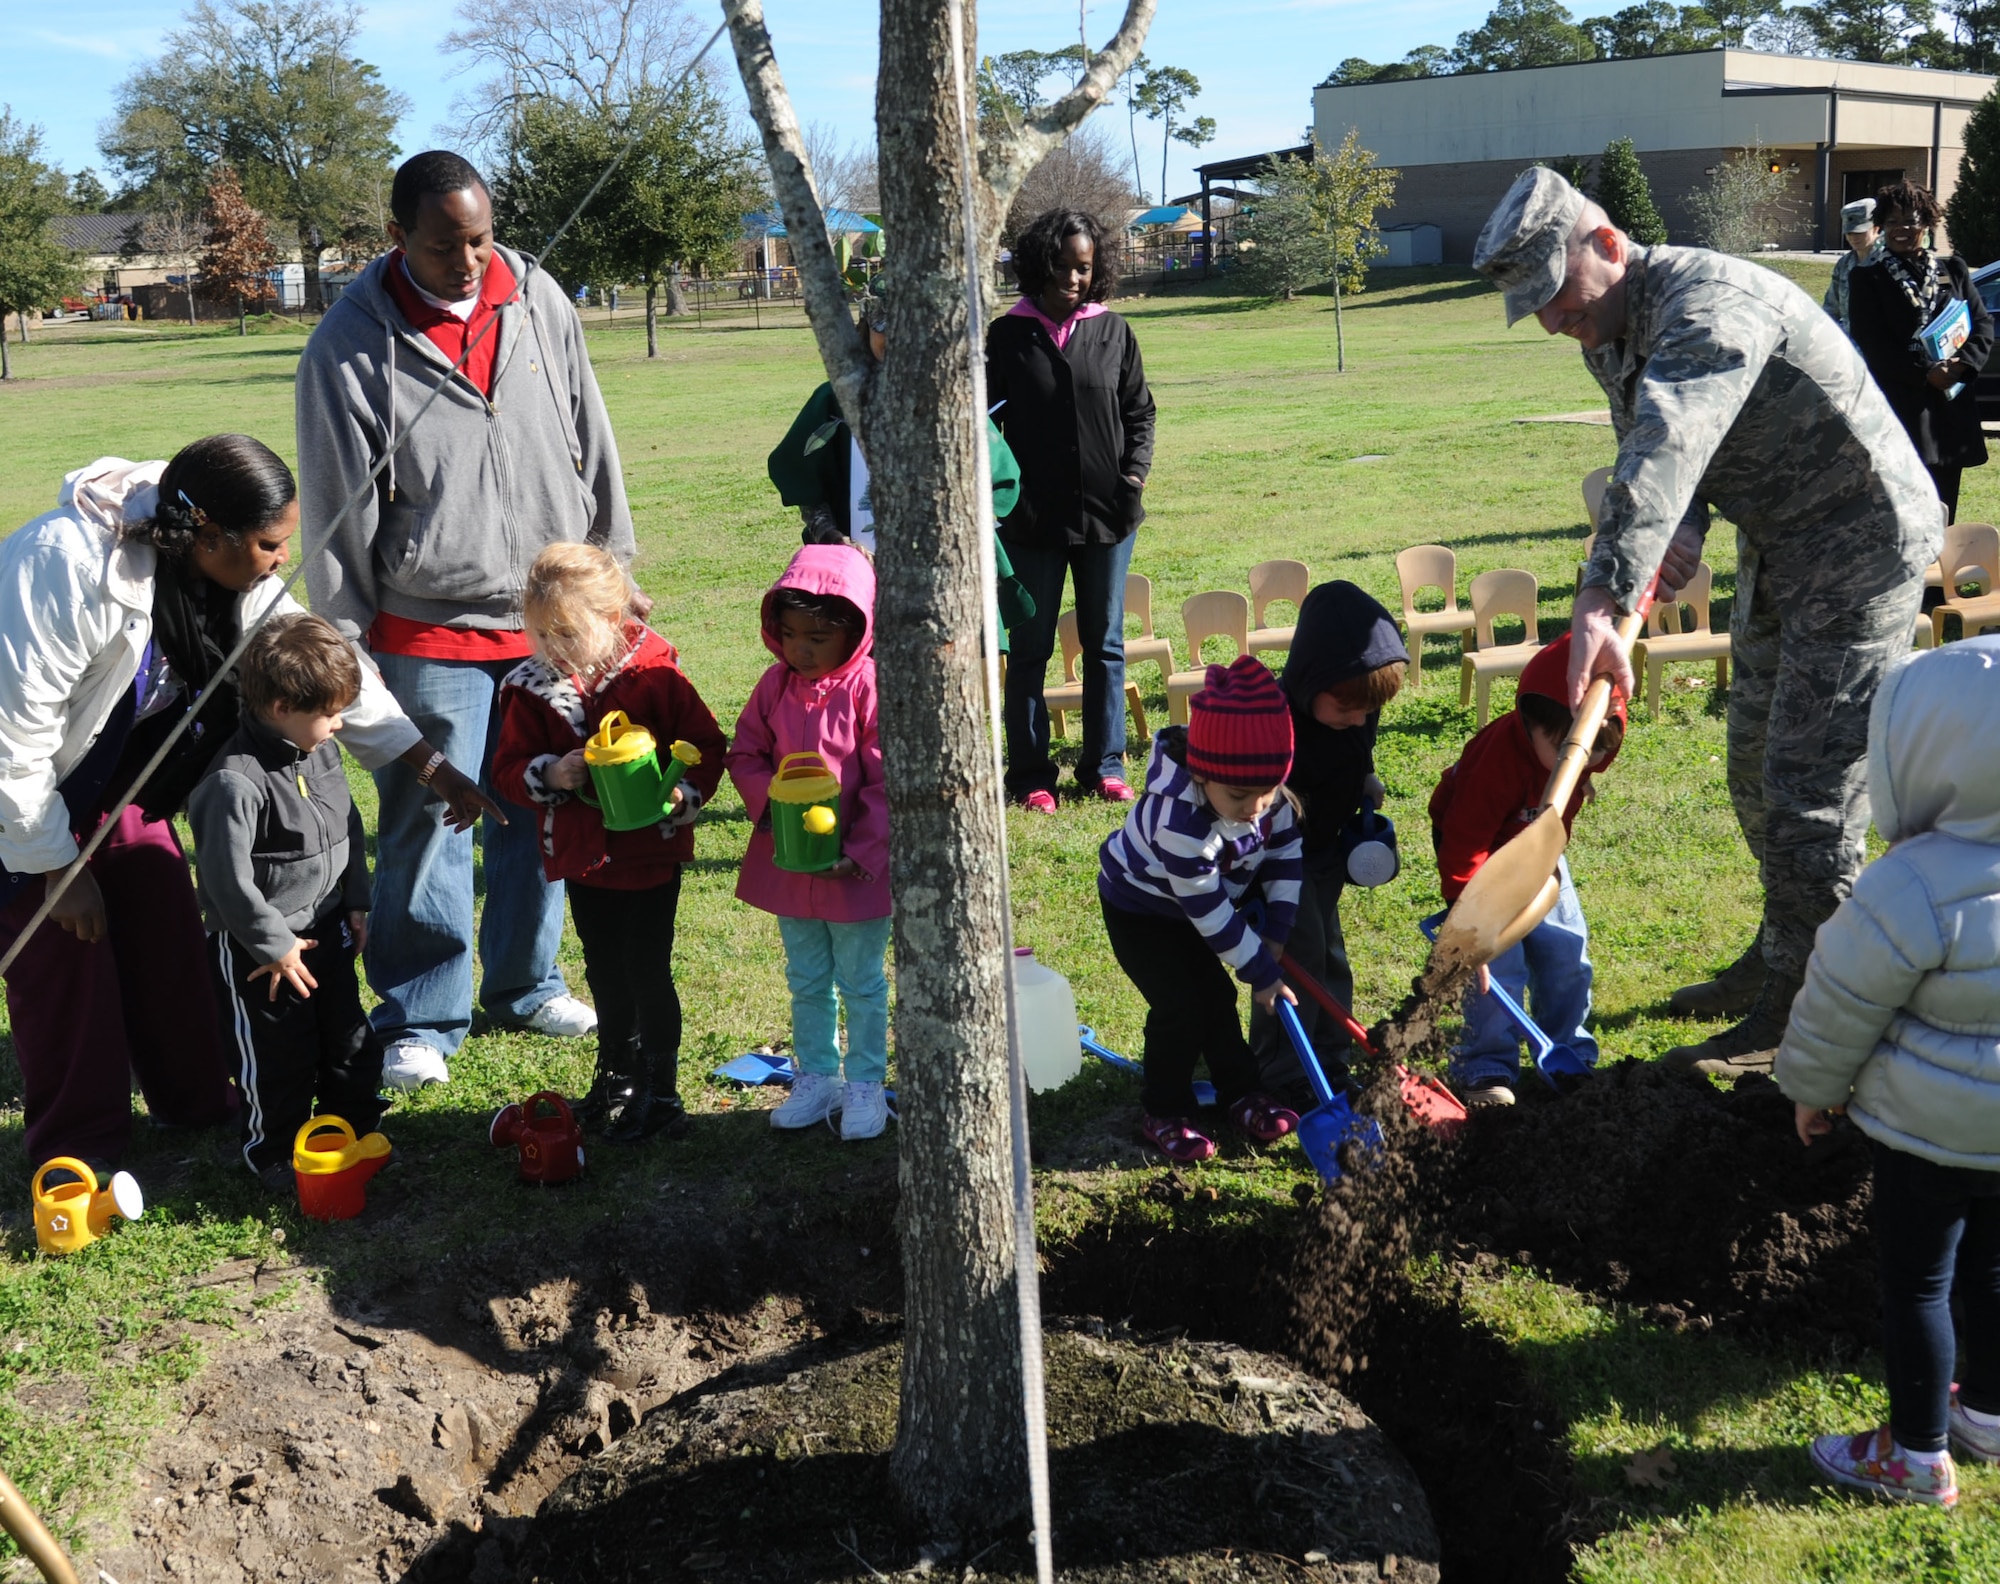 Brig. Gen. Patrick Higby, 81st Training Wing commander, plants a tree in honor of Arbor Day along with a preschool class at the child development center Feb. 21, 2014, at Keesler Air Force Base, Miss.  The Tree City USA award was presented to Keesler for the 21st consecutive year for its tree management program.  (U.S. Air Force photo by Kemberly Groue)